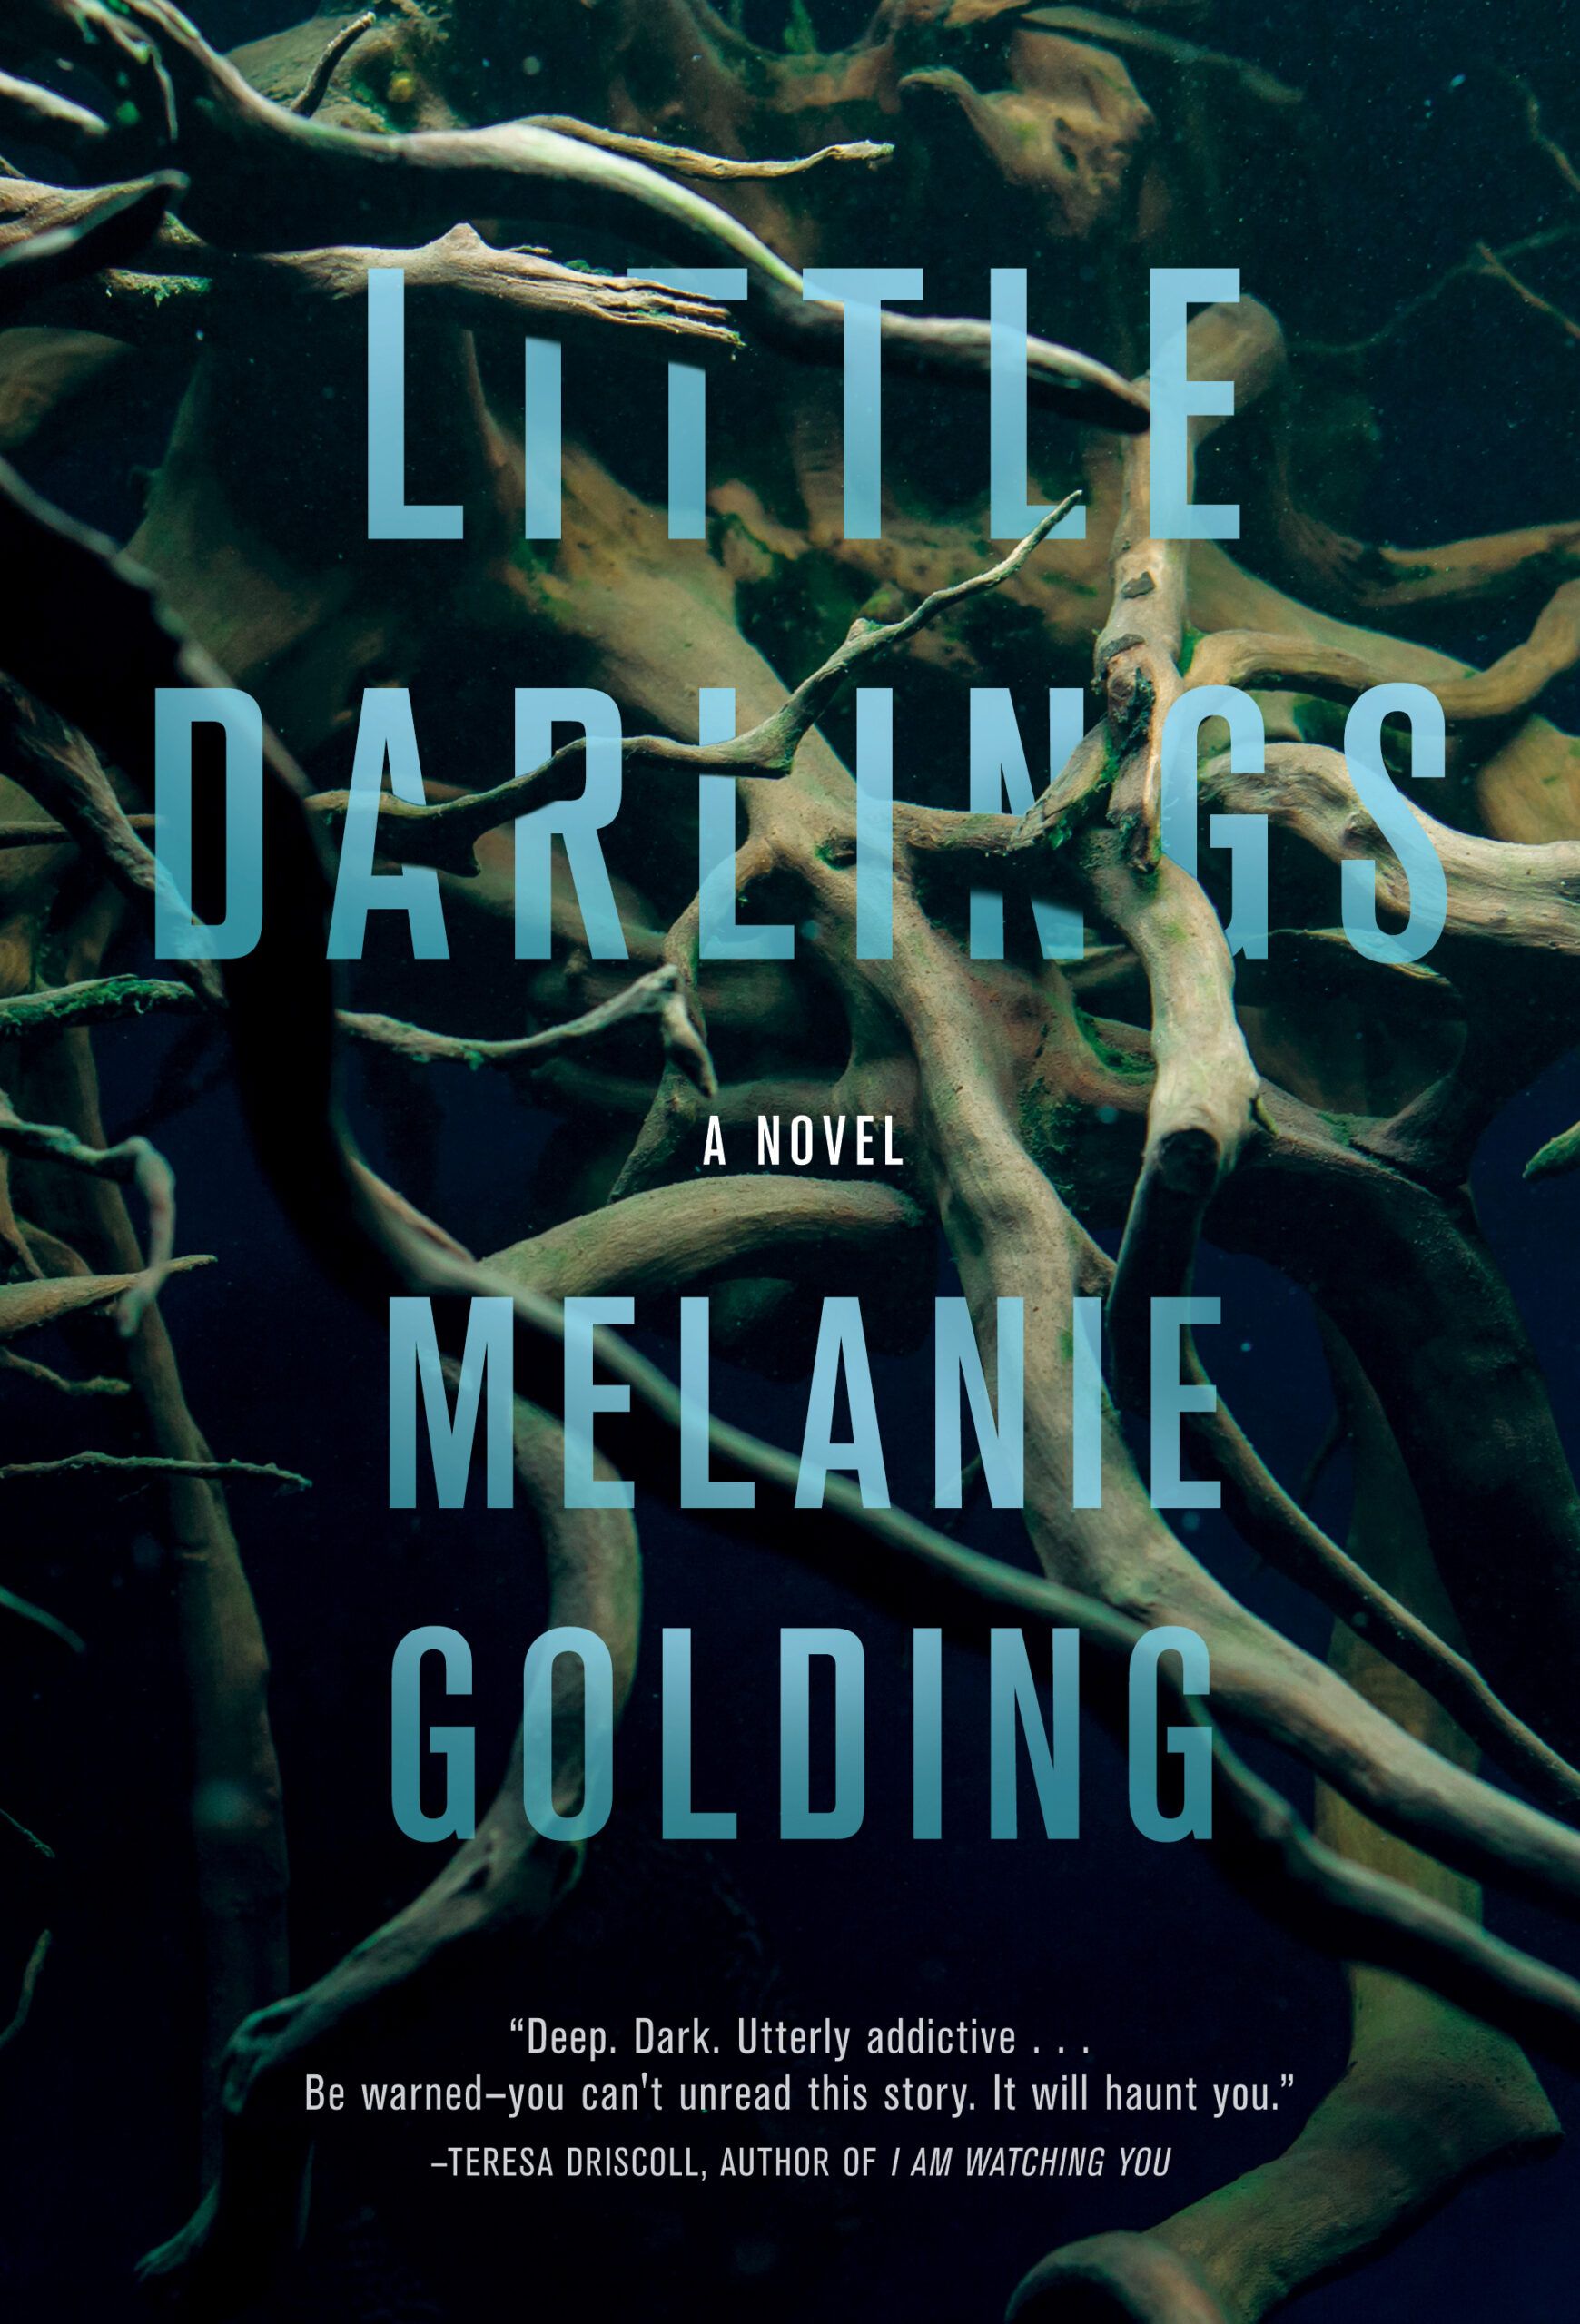 Cover of Little Darlings